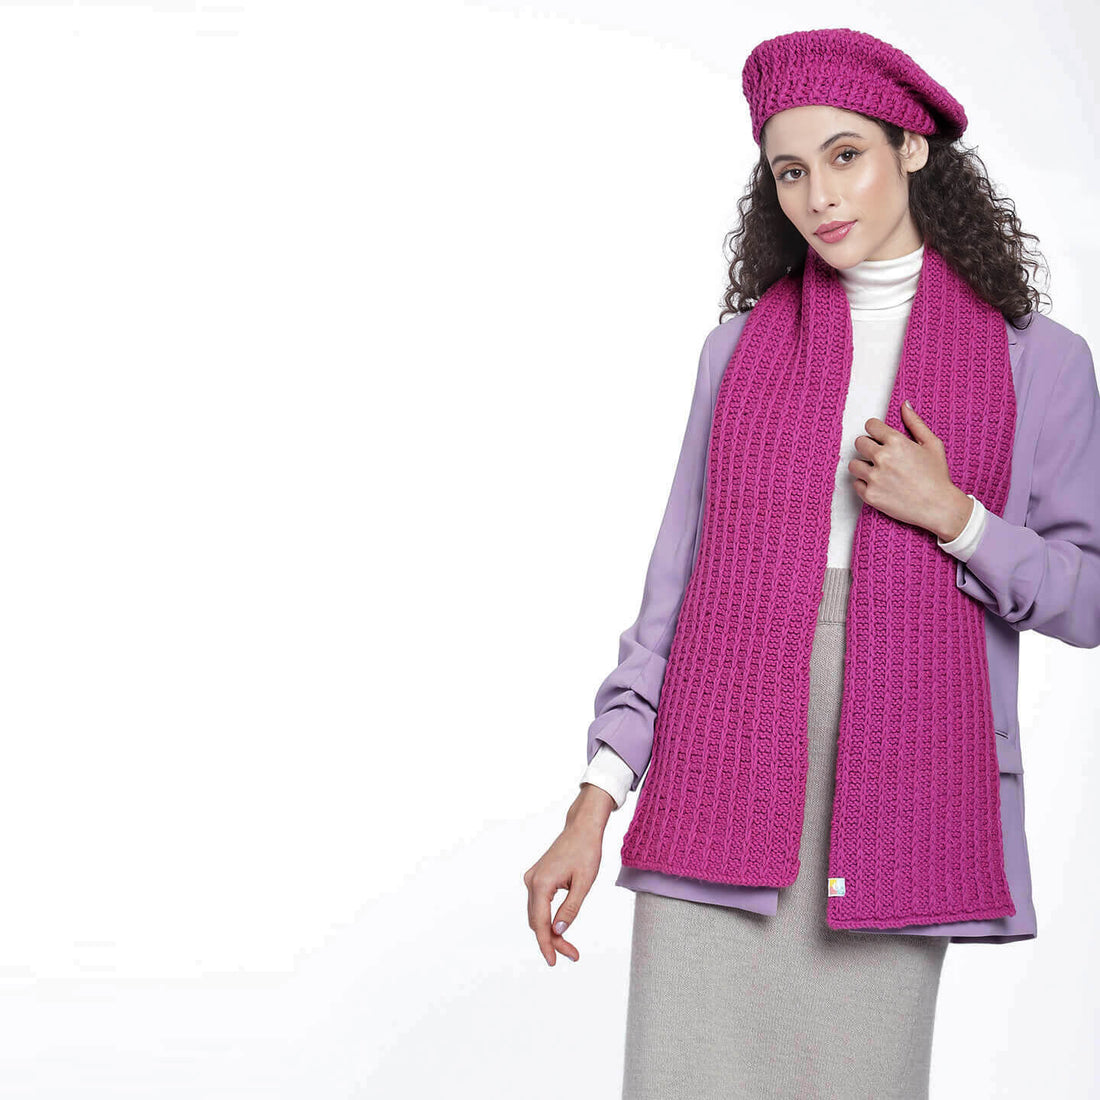 Beanie and Scarf Coordinating Set - 3182